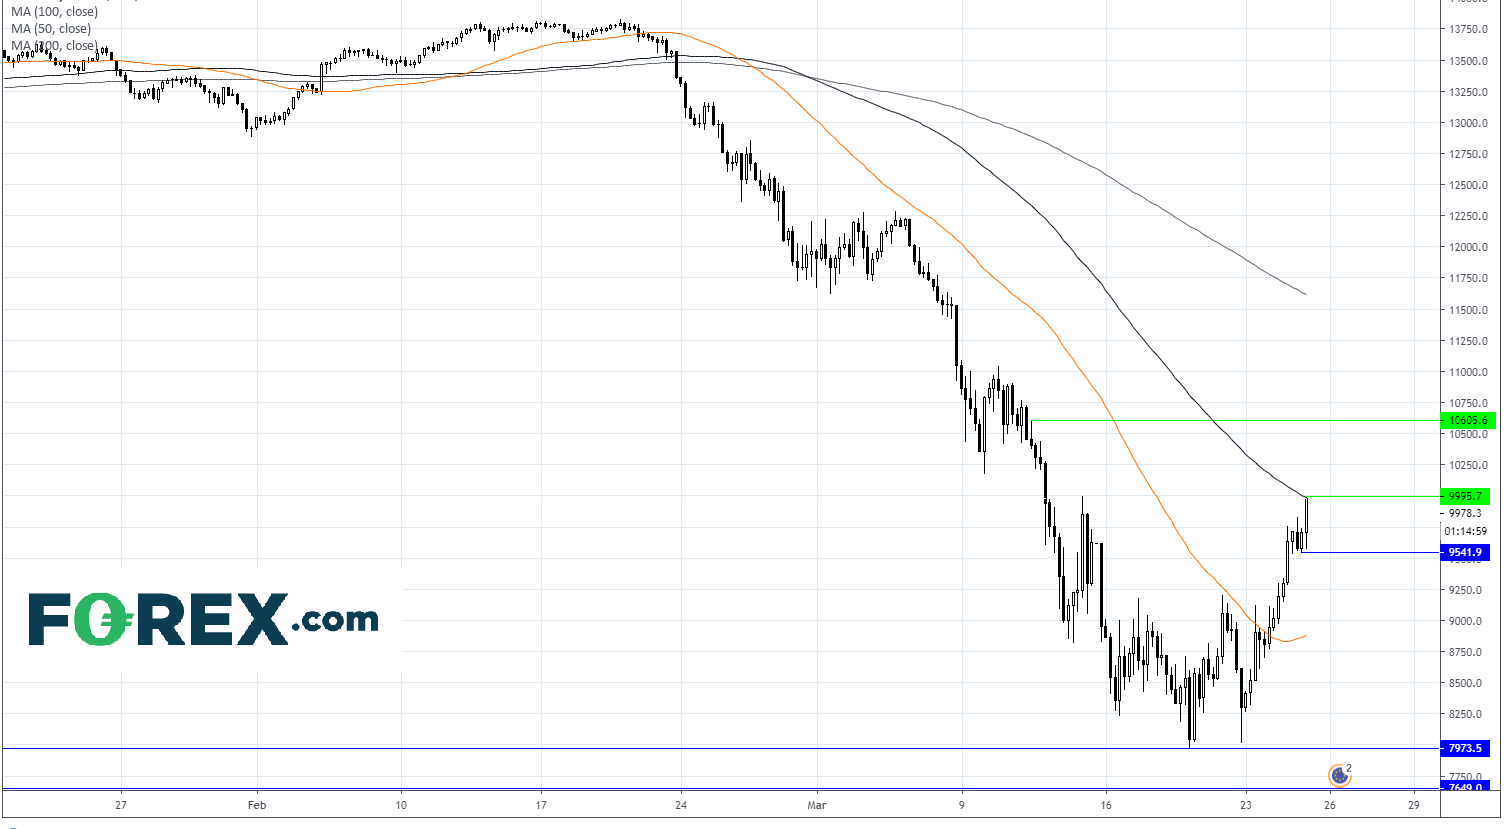 Chart analysis demonstrating how Dax Extends Gains On Us Stimulus Package Hopes. Published in March 2020 by FOREX.com